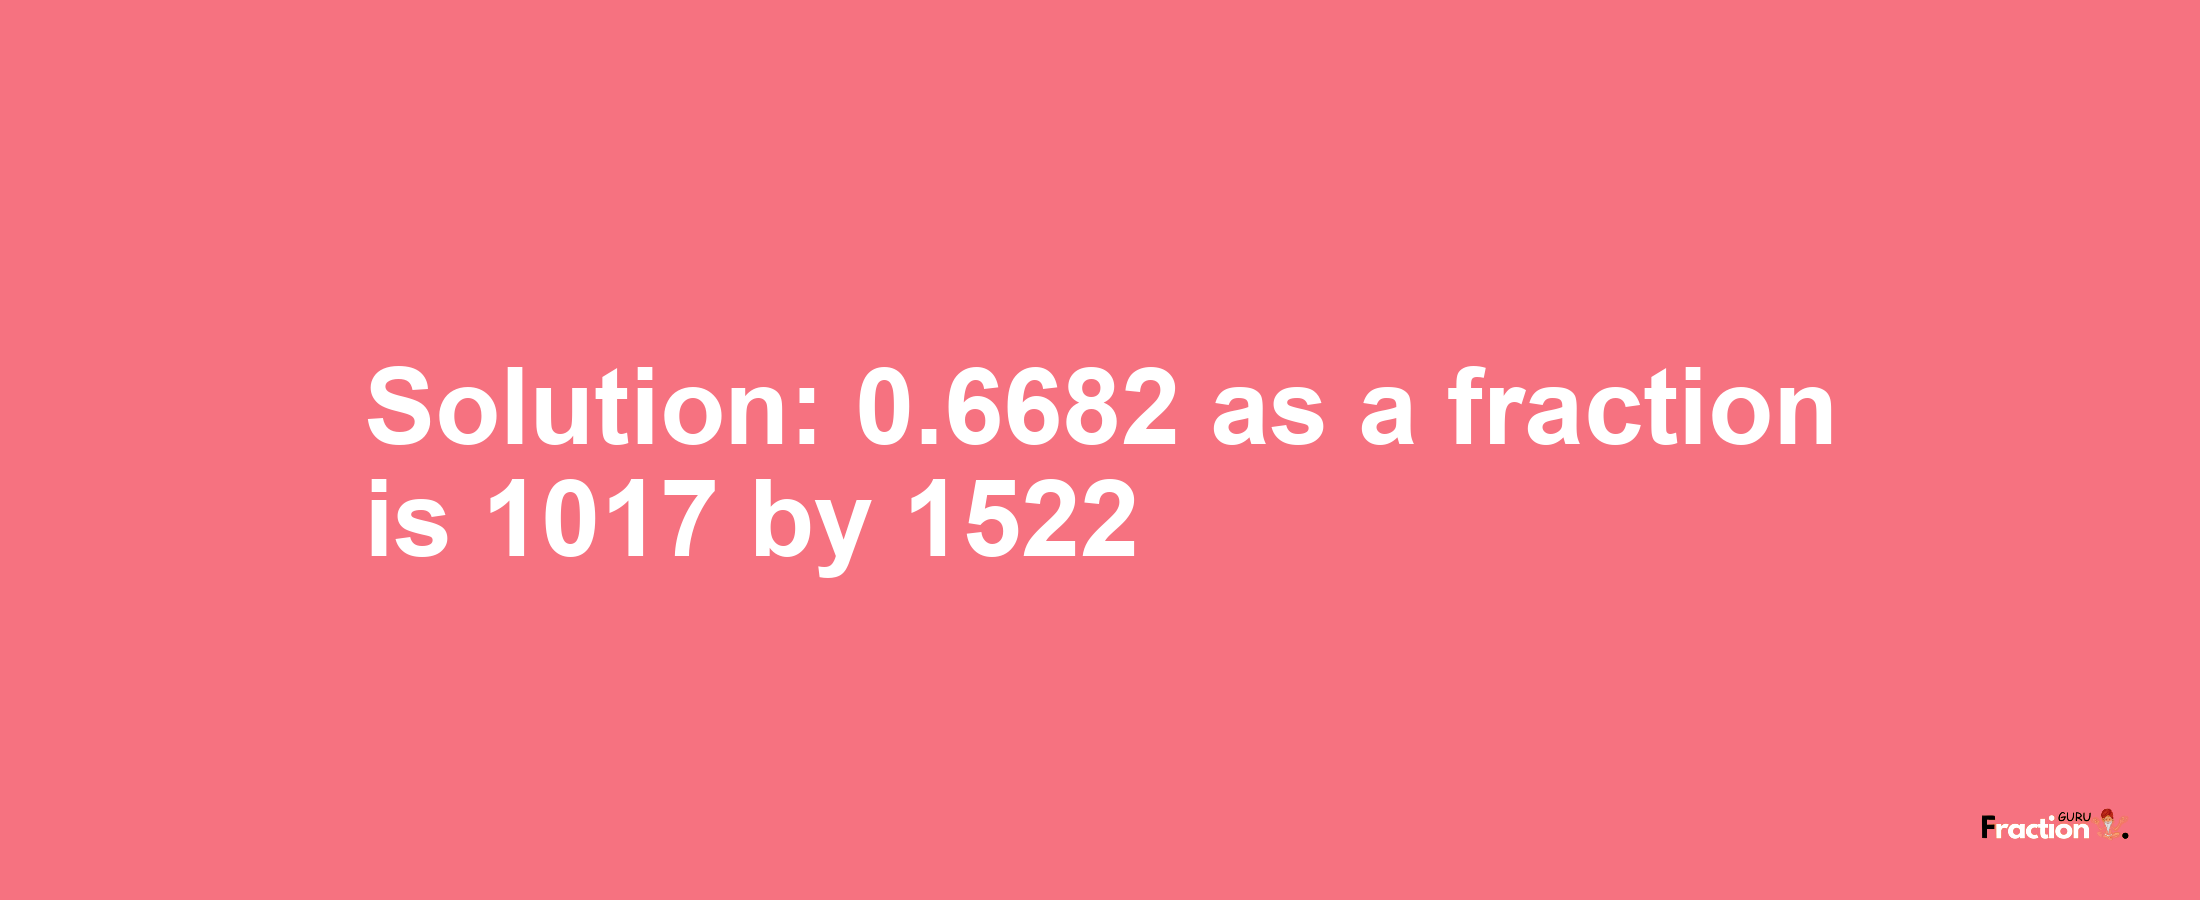 Solution:0.6682 as a fraction is 1017/1522